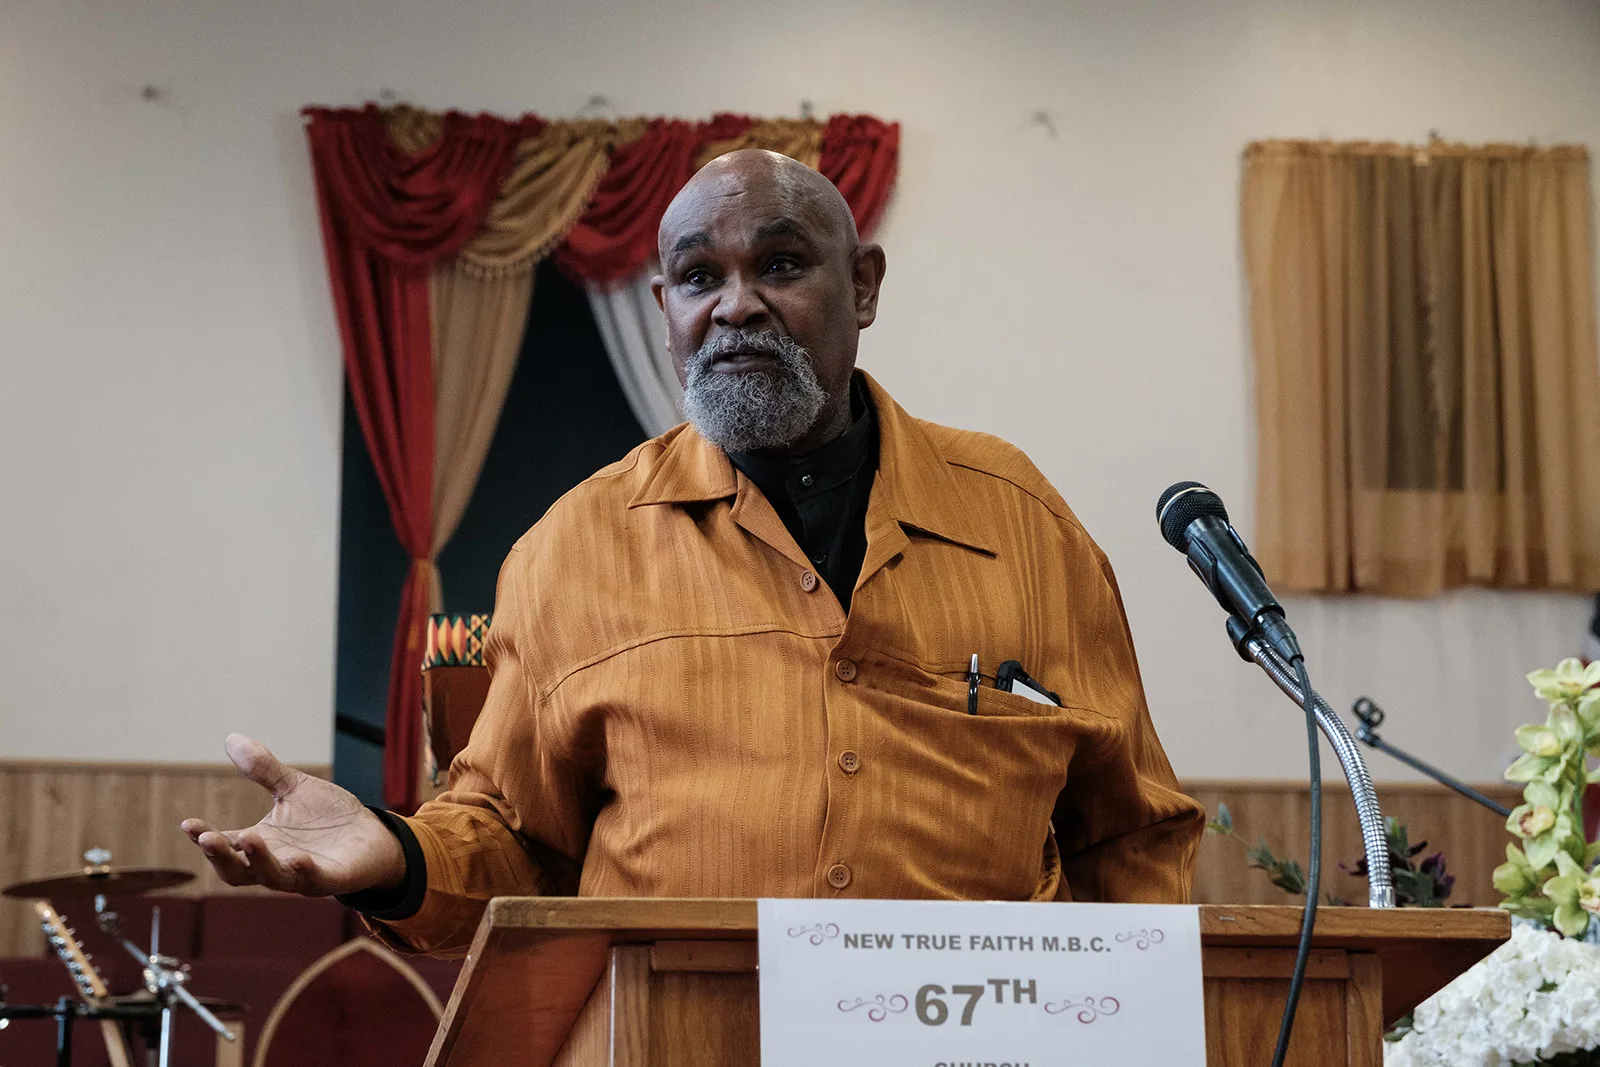 Pastor Thompson, A bald Black man with a grey beard wearing wearing a gold suit, stands at a podium and gestures to his left. 